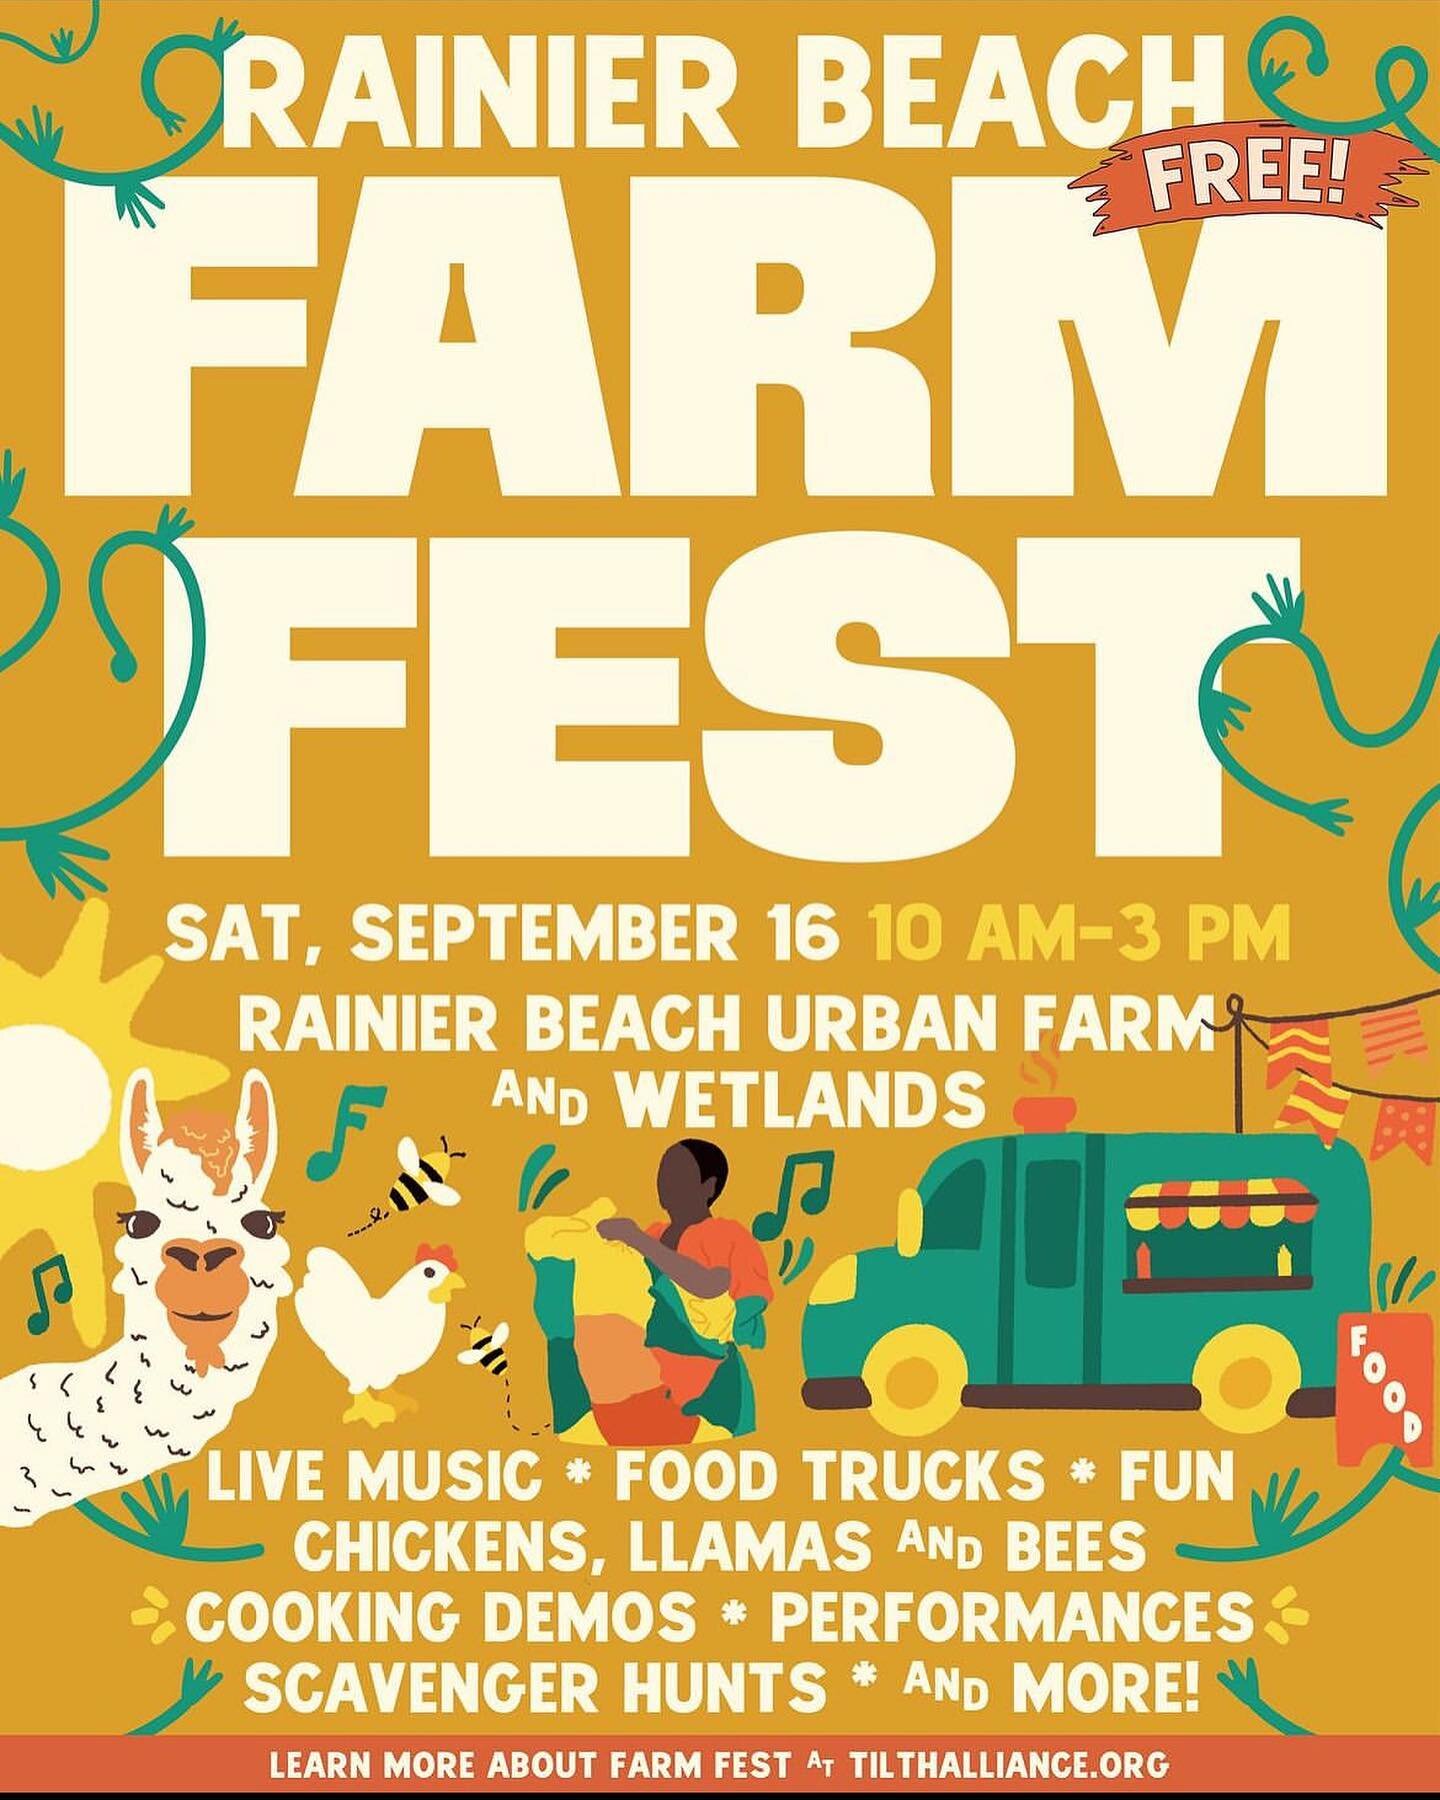 Exciting news!!! ✨💃🏽✨

Tomorrow (Saturday, September 16th) I&rsquo;ll be demoing how to make gochujang at 12PM at the Rainier Beach Farm Fest! 🌶️🍯🌶️

This amazing event will be happening at @rb_urbanfarmandwetlands (5513 S Cloverdale) and goes f